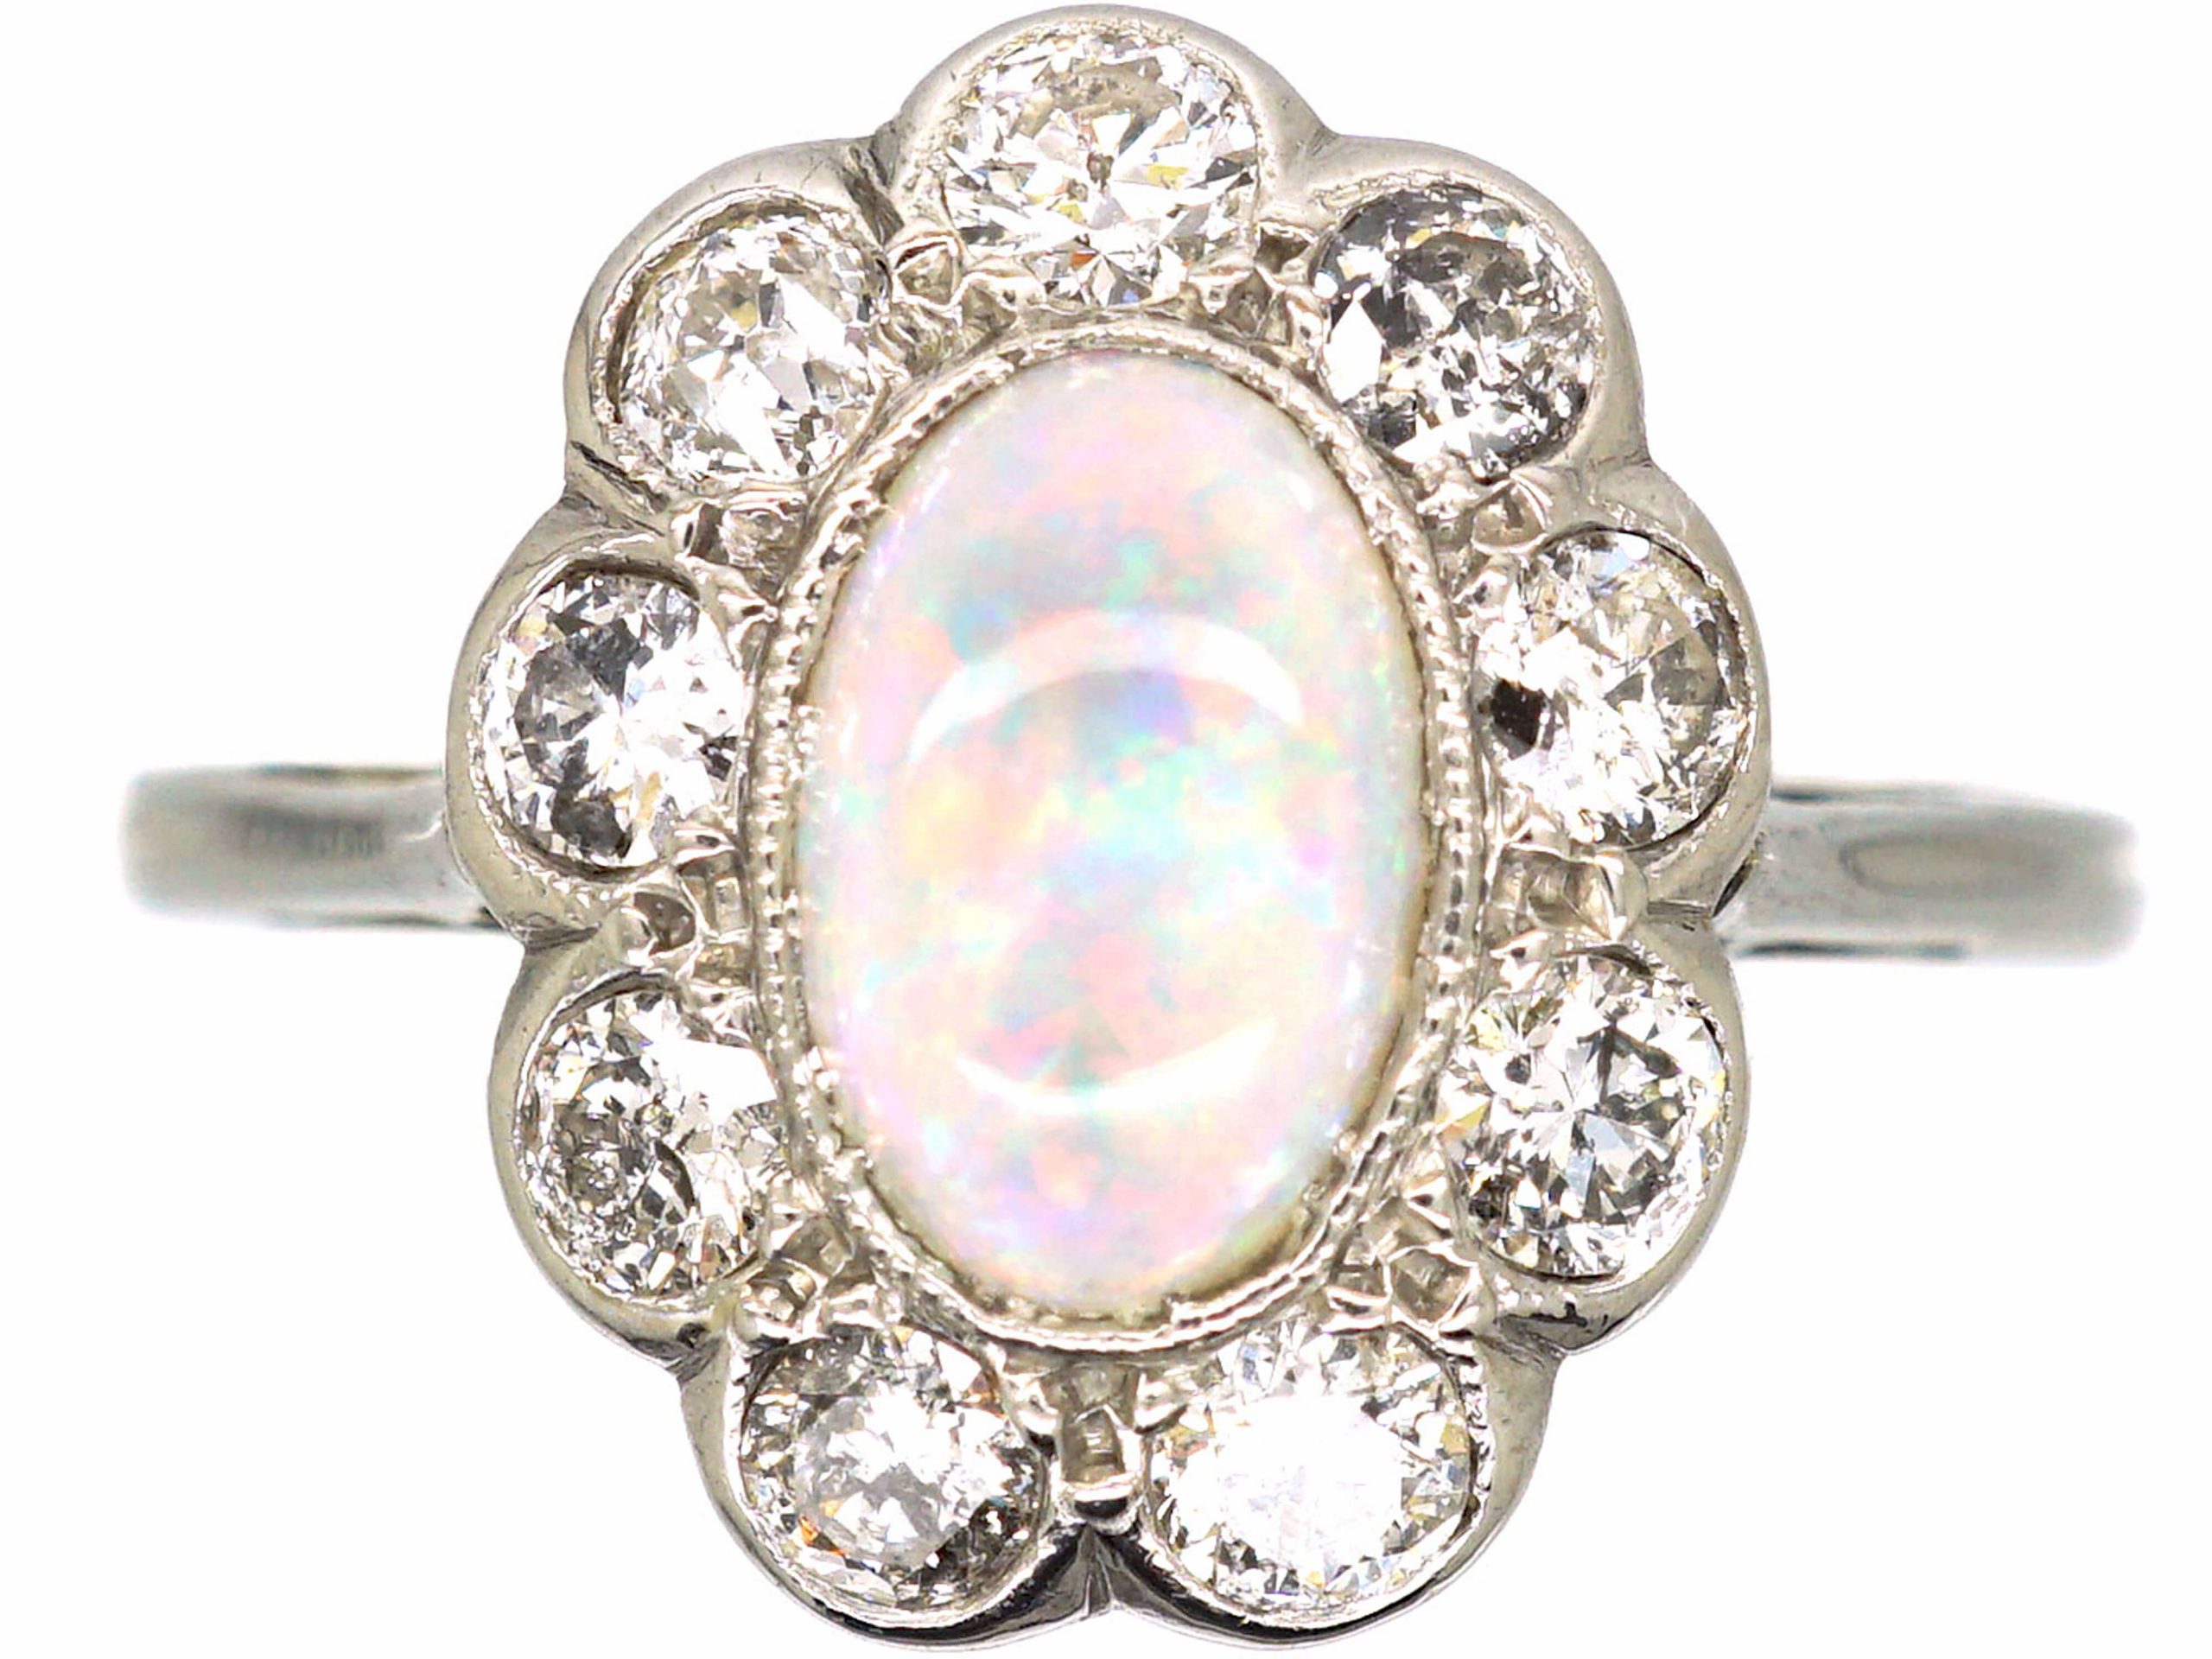 Early 20th Century Opal & Diamond Cluster Ring (53T) | The Antique ...